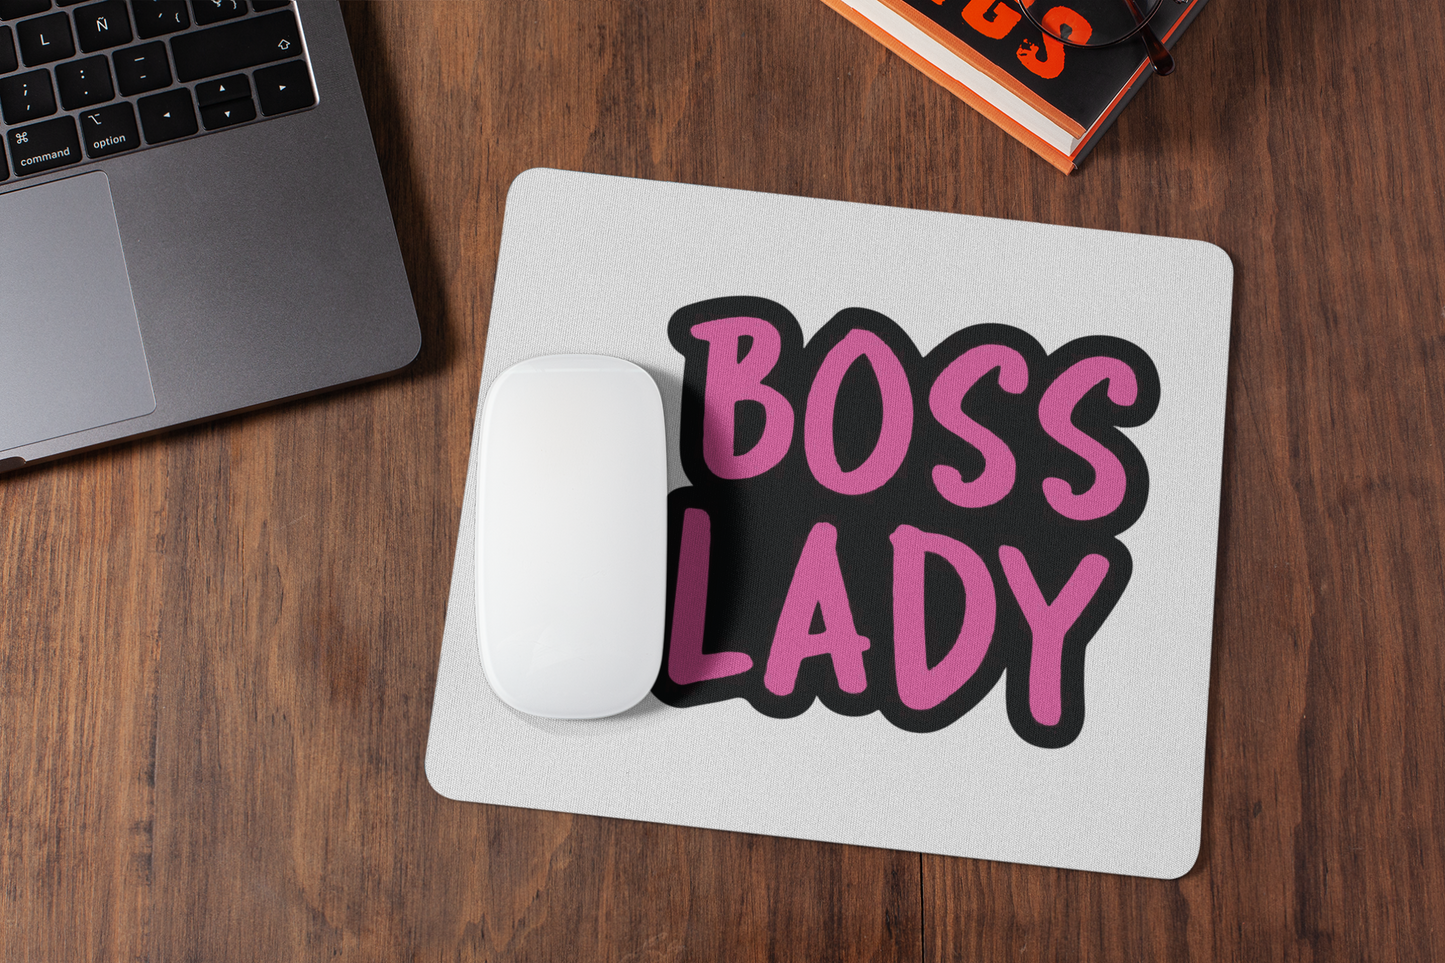 Boss lady  mousepad for laptop and desktop with Rubber Base - Anti Skid